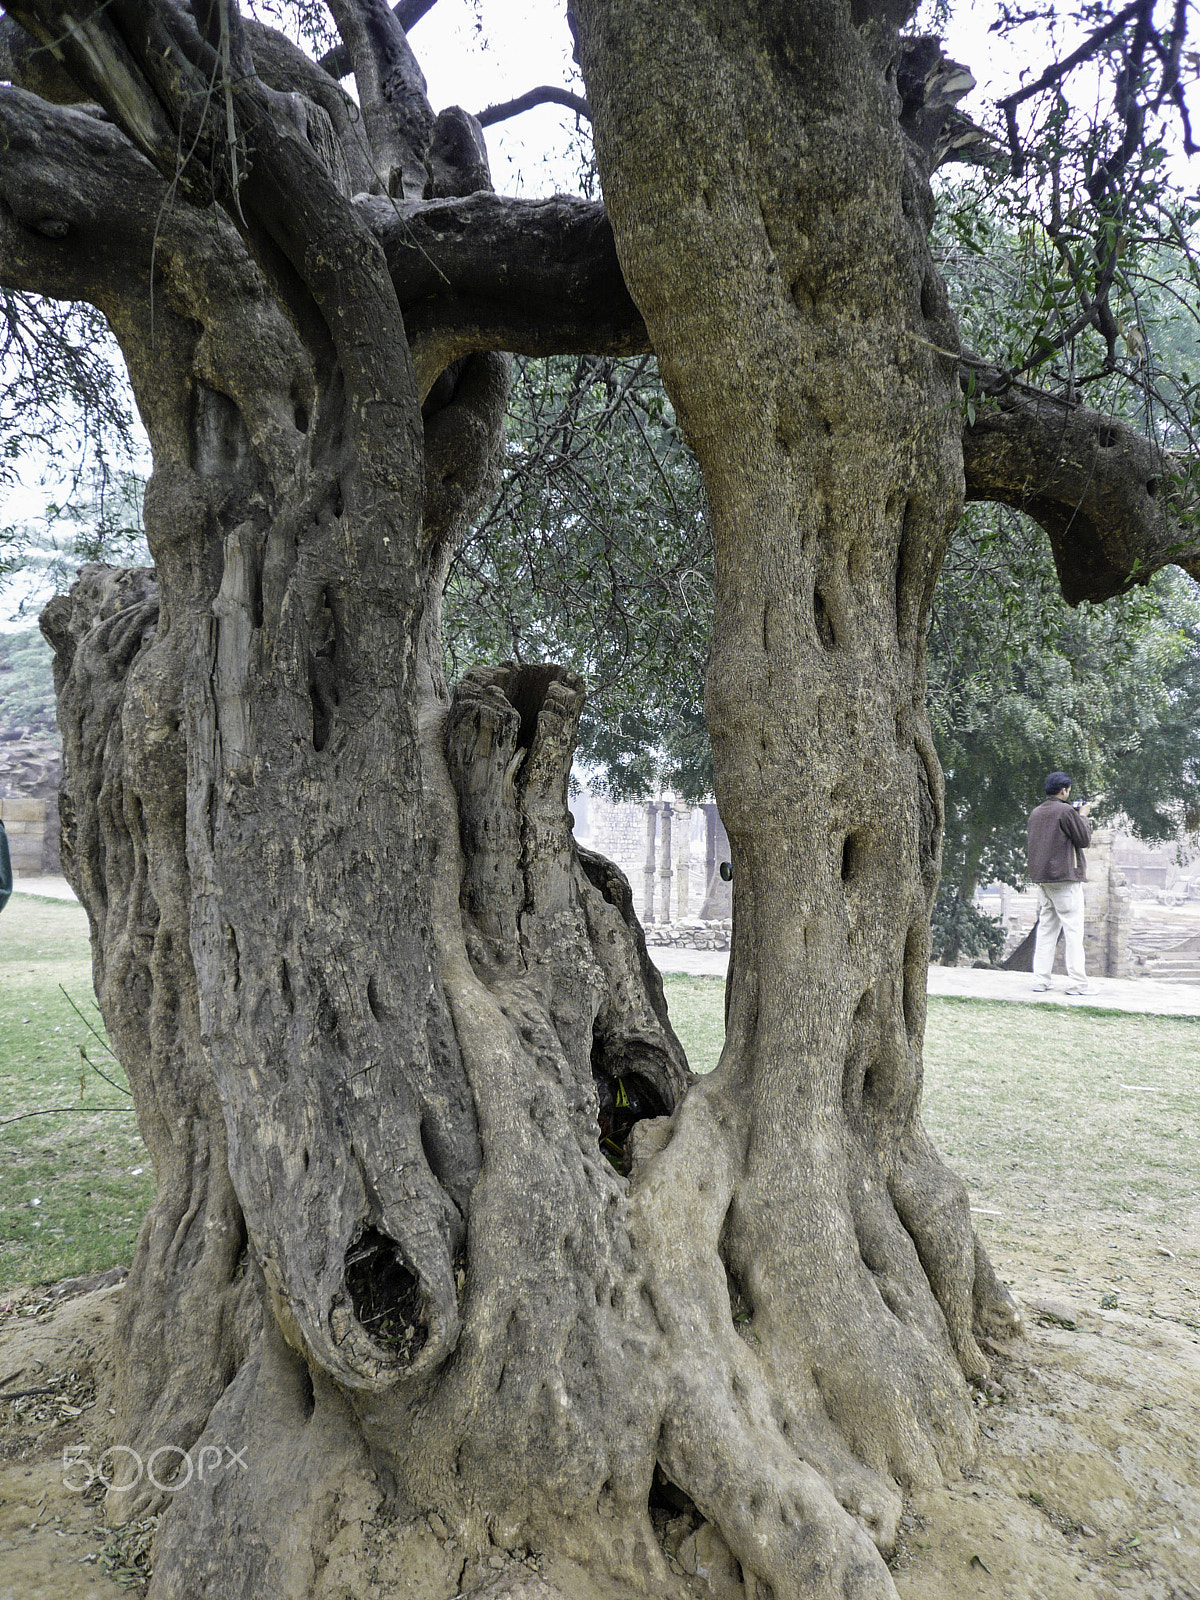 Panasonic DMC-FX100 sample photo. The twisted, gnarled stump and stem of a large tree inside the q photography